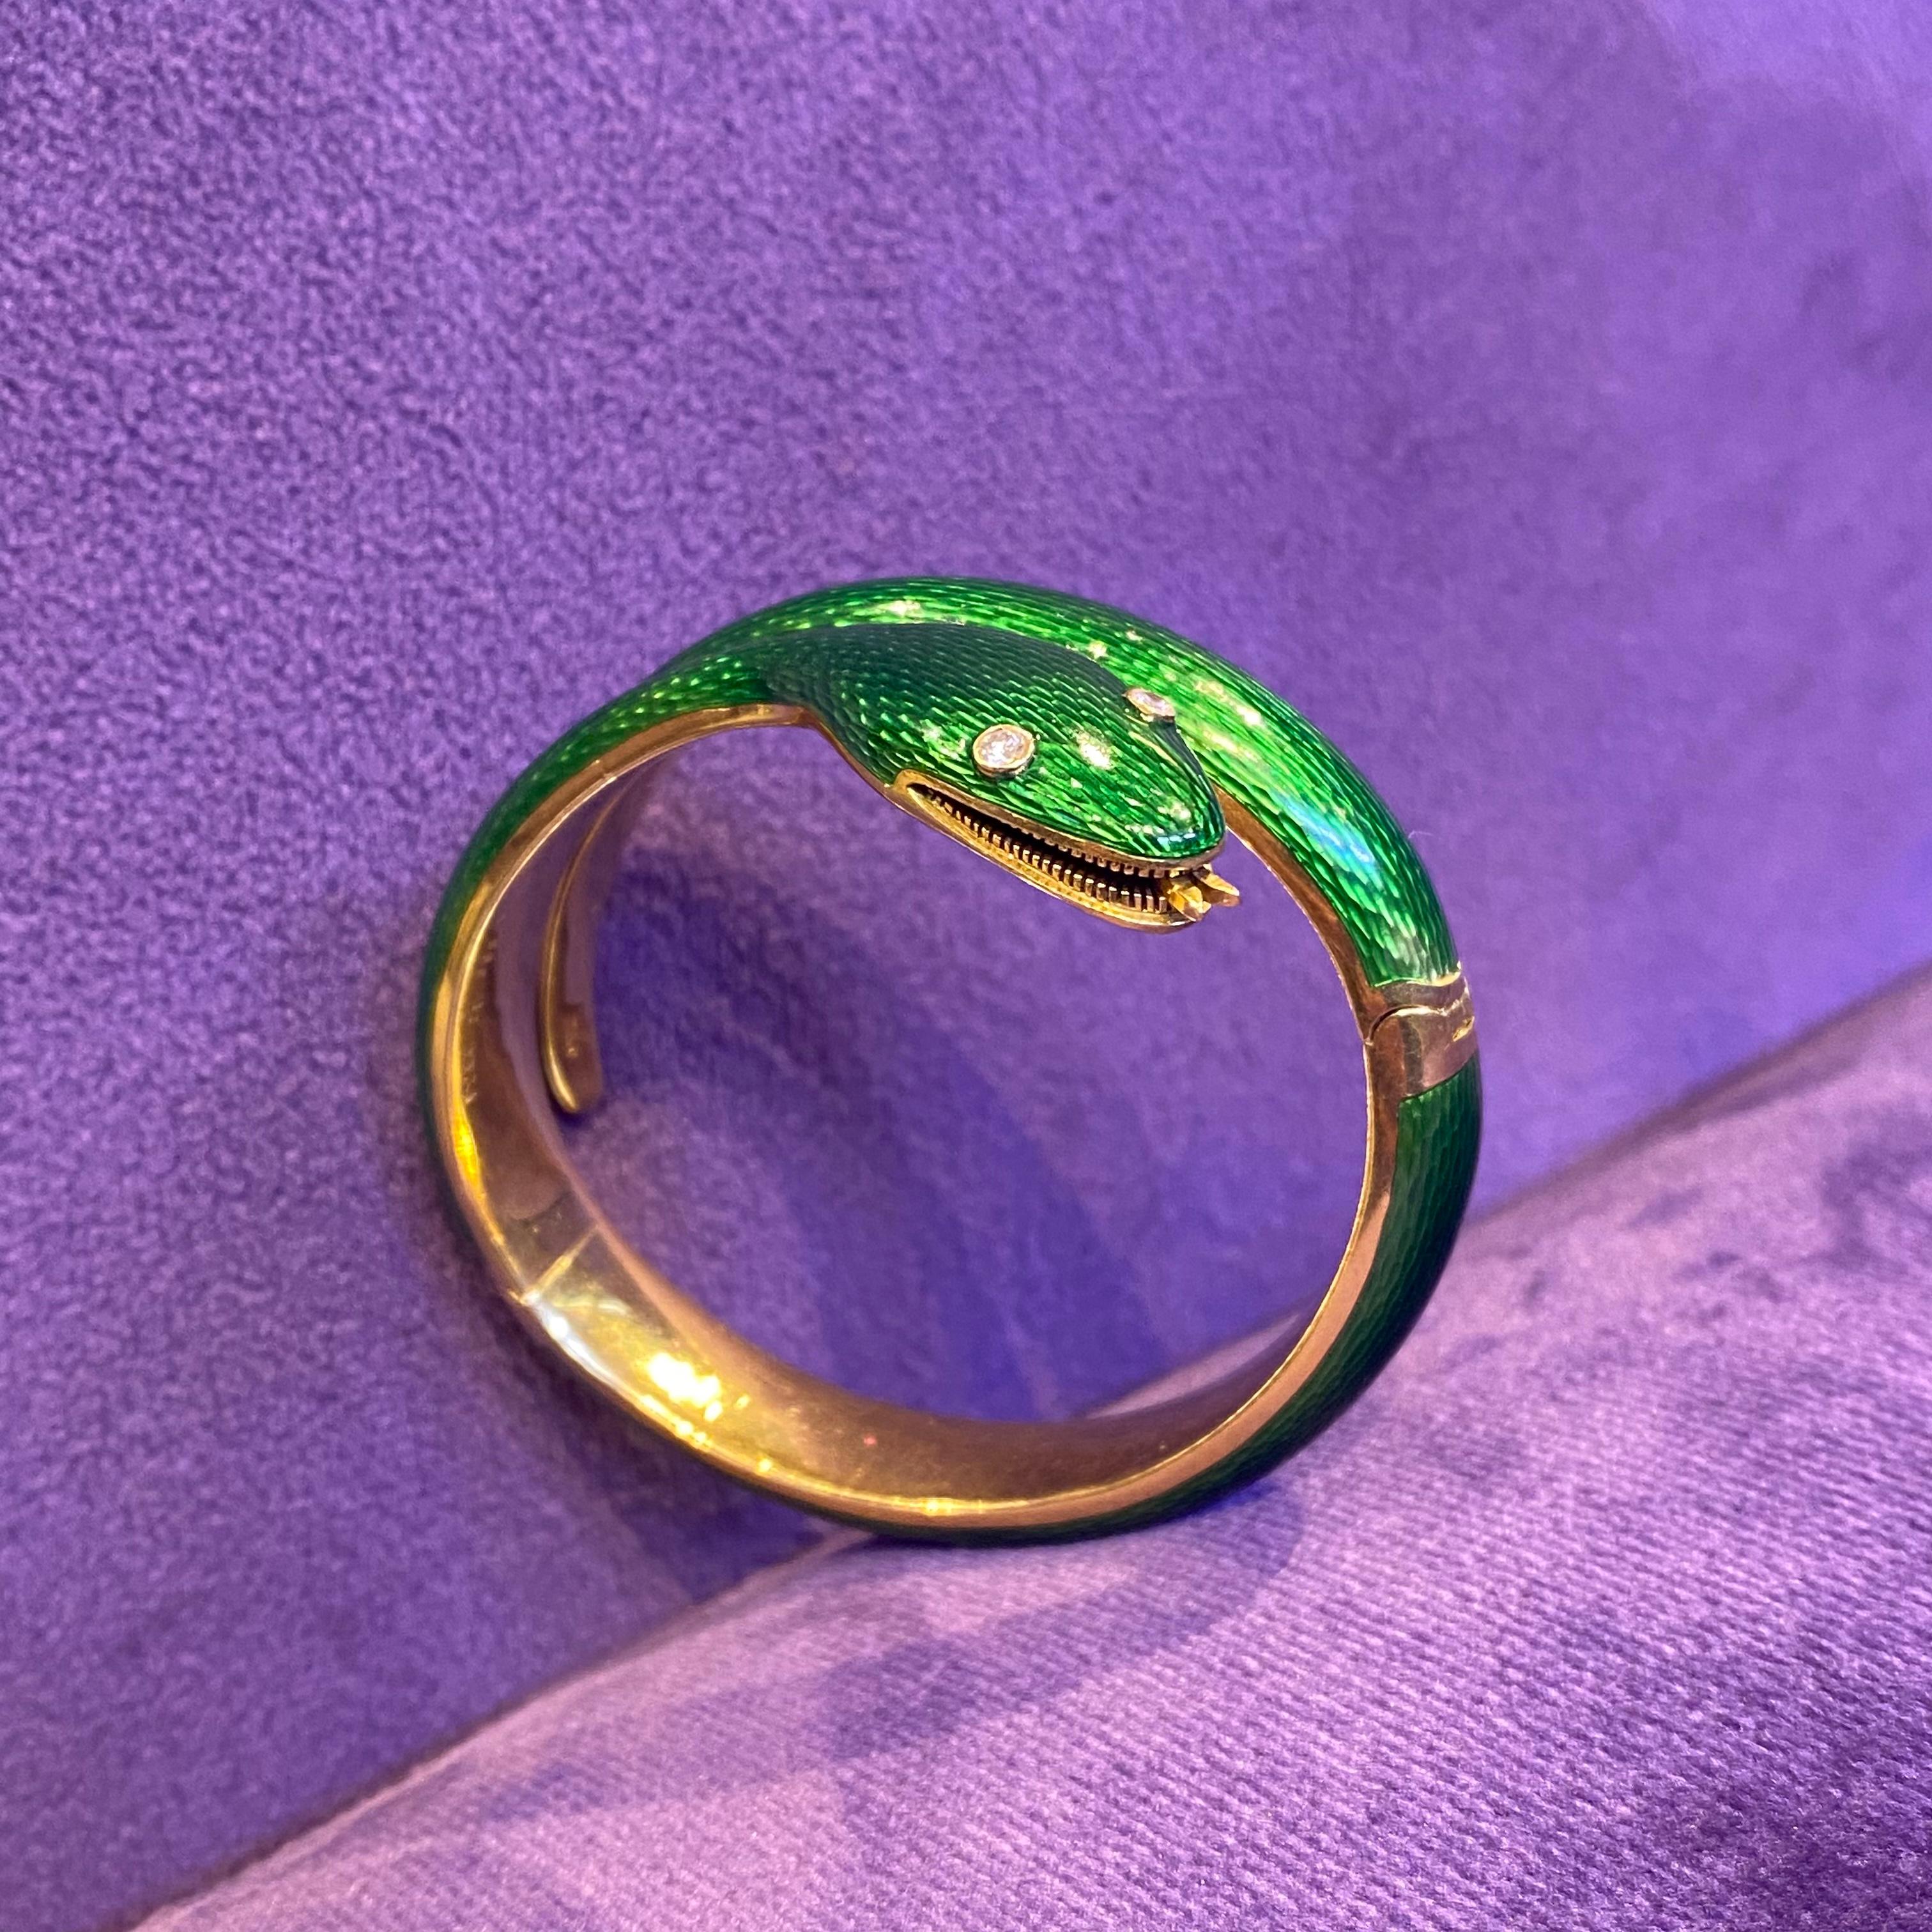 Van Cleef & Arpels Green Enamel Snake Bangle In Excellent Condition For Sale In New York, NY